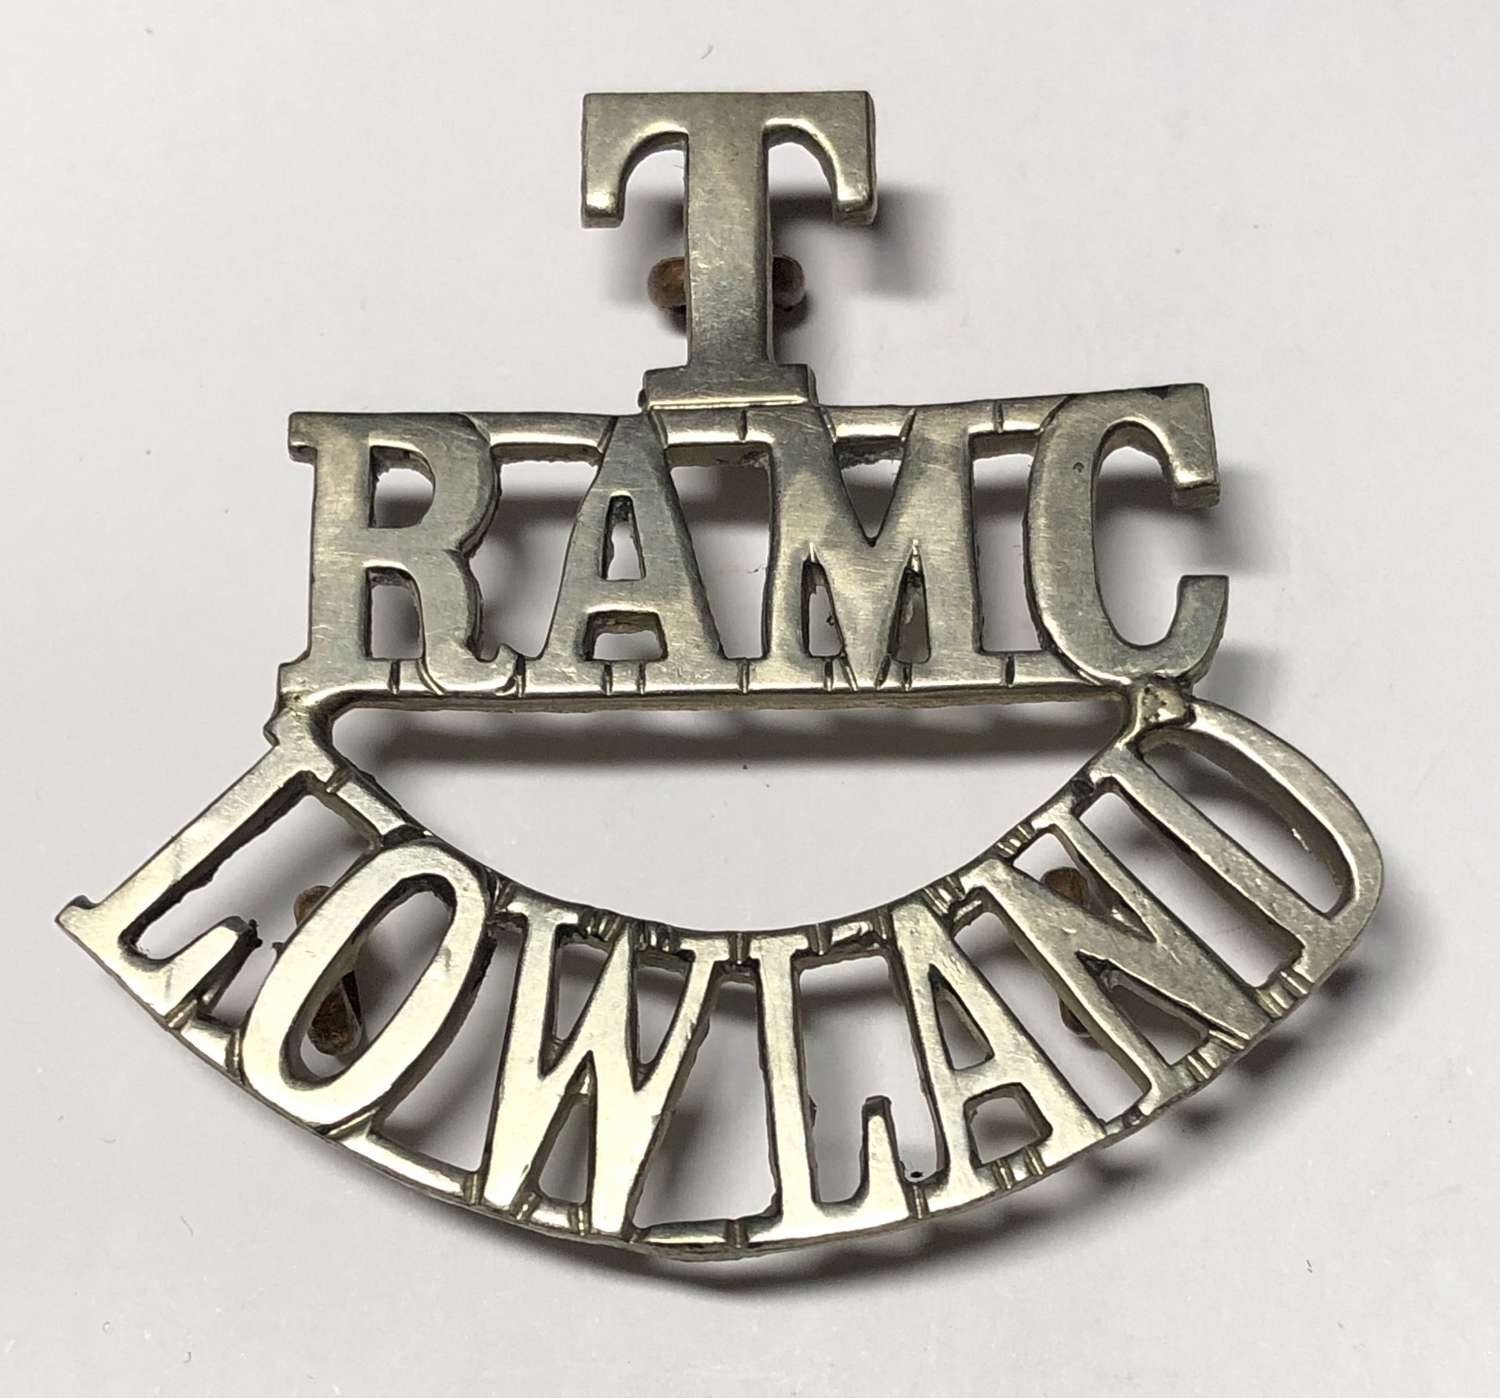 T / RAMC / LOWLAND Scottish Royal Army Medical Corps shoulder title